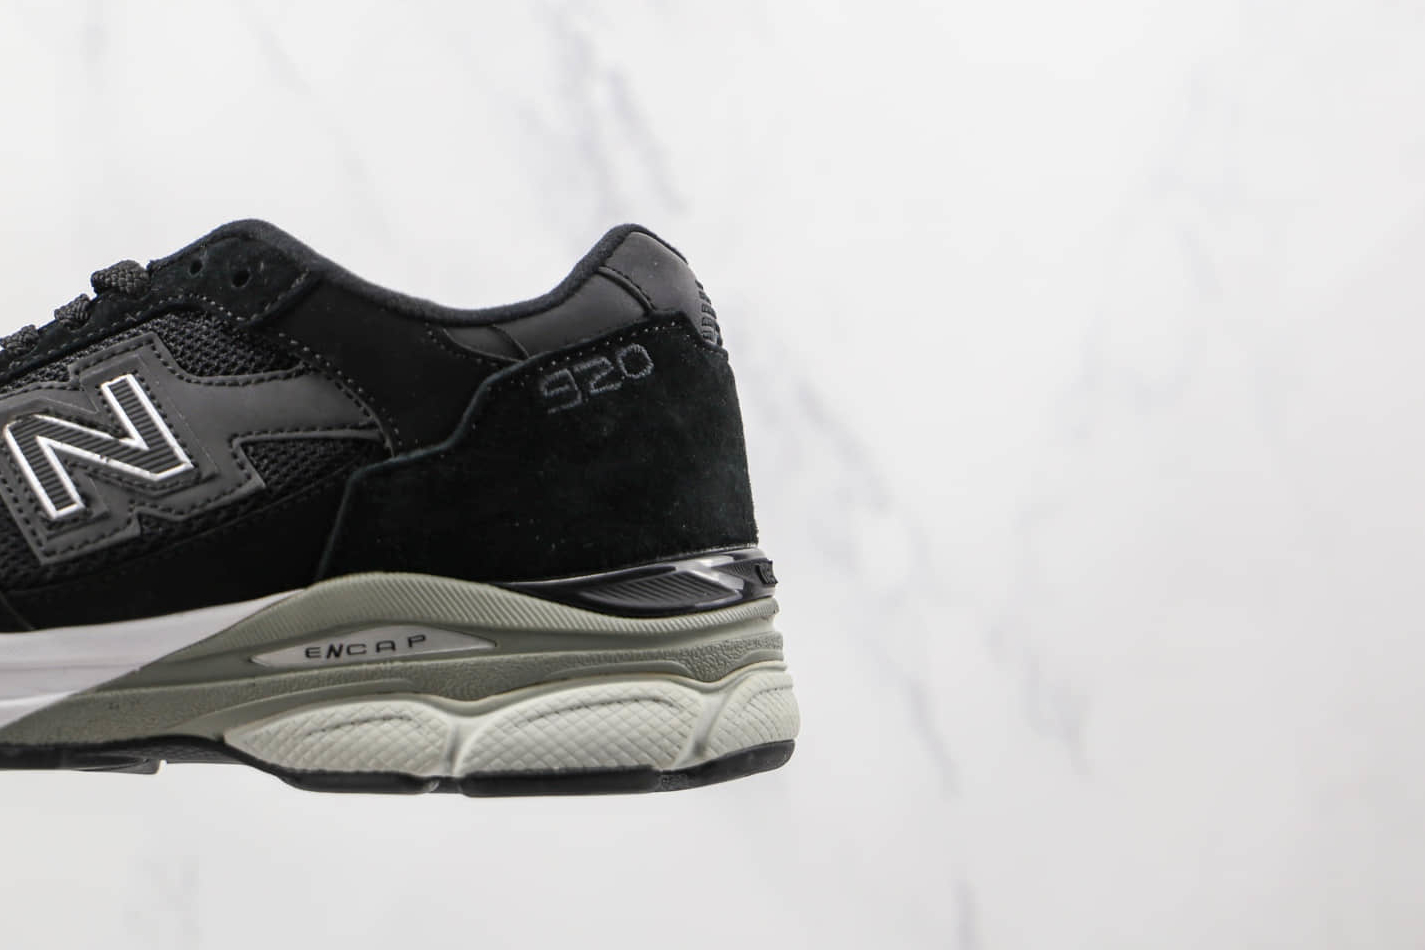 New Balance 920 Black M920KR - Sleek Style and Comfort for Any Occasion